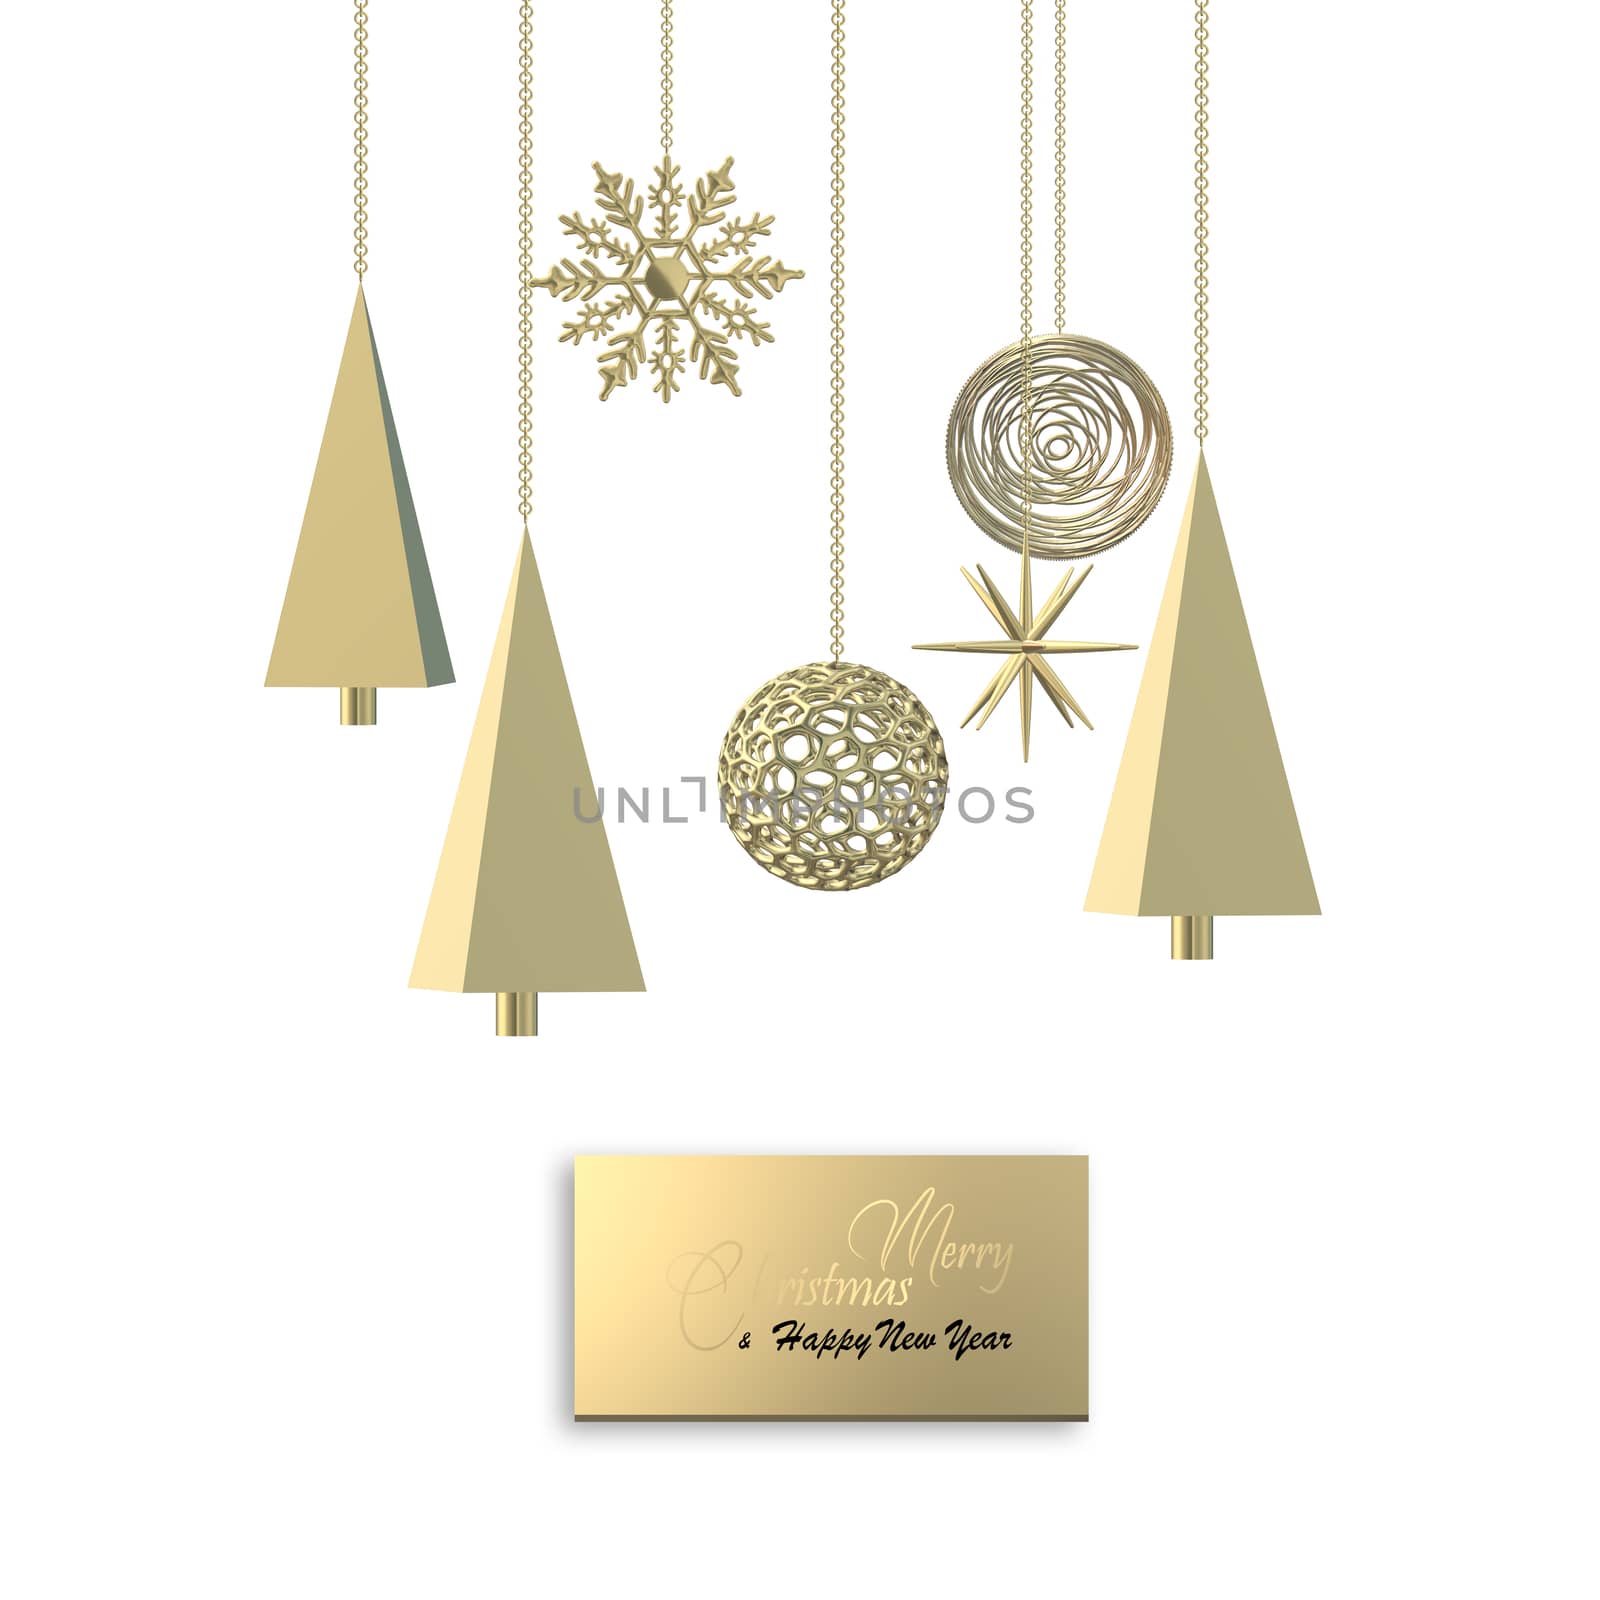 Christmas minimalist golden design. 3D Xmas tree, golden balls, golden snowflakes, abstract gold decorations on white background. Text on gold gift tag Merry Christmas Happy New Year. 3D illustration